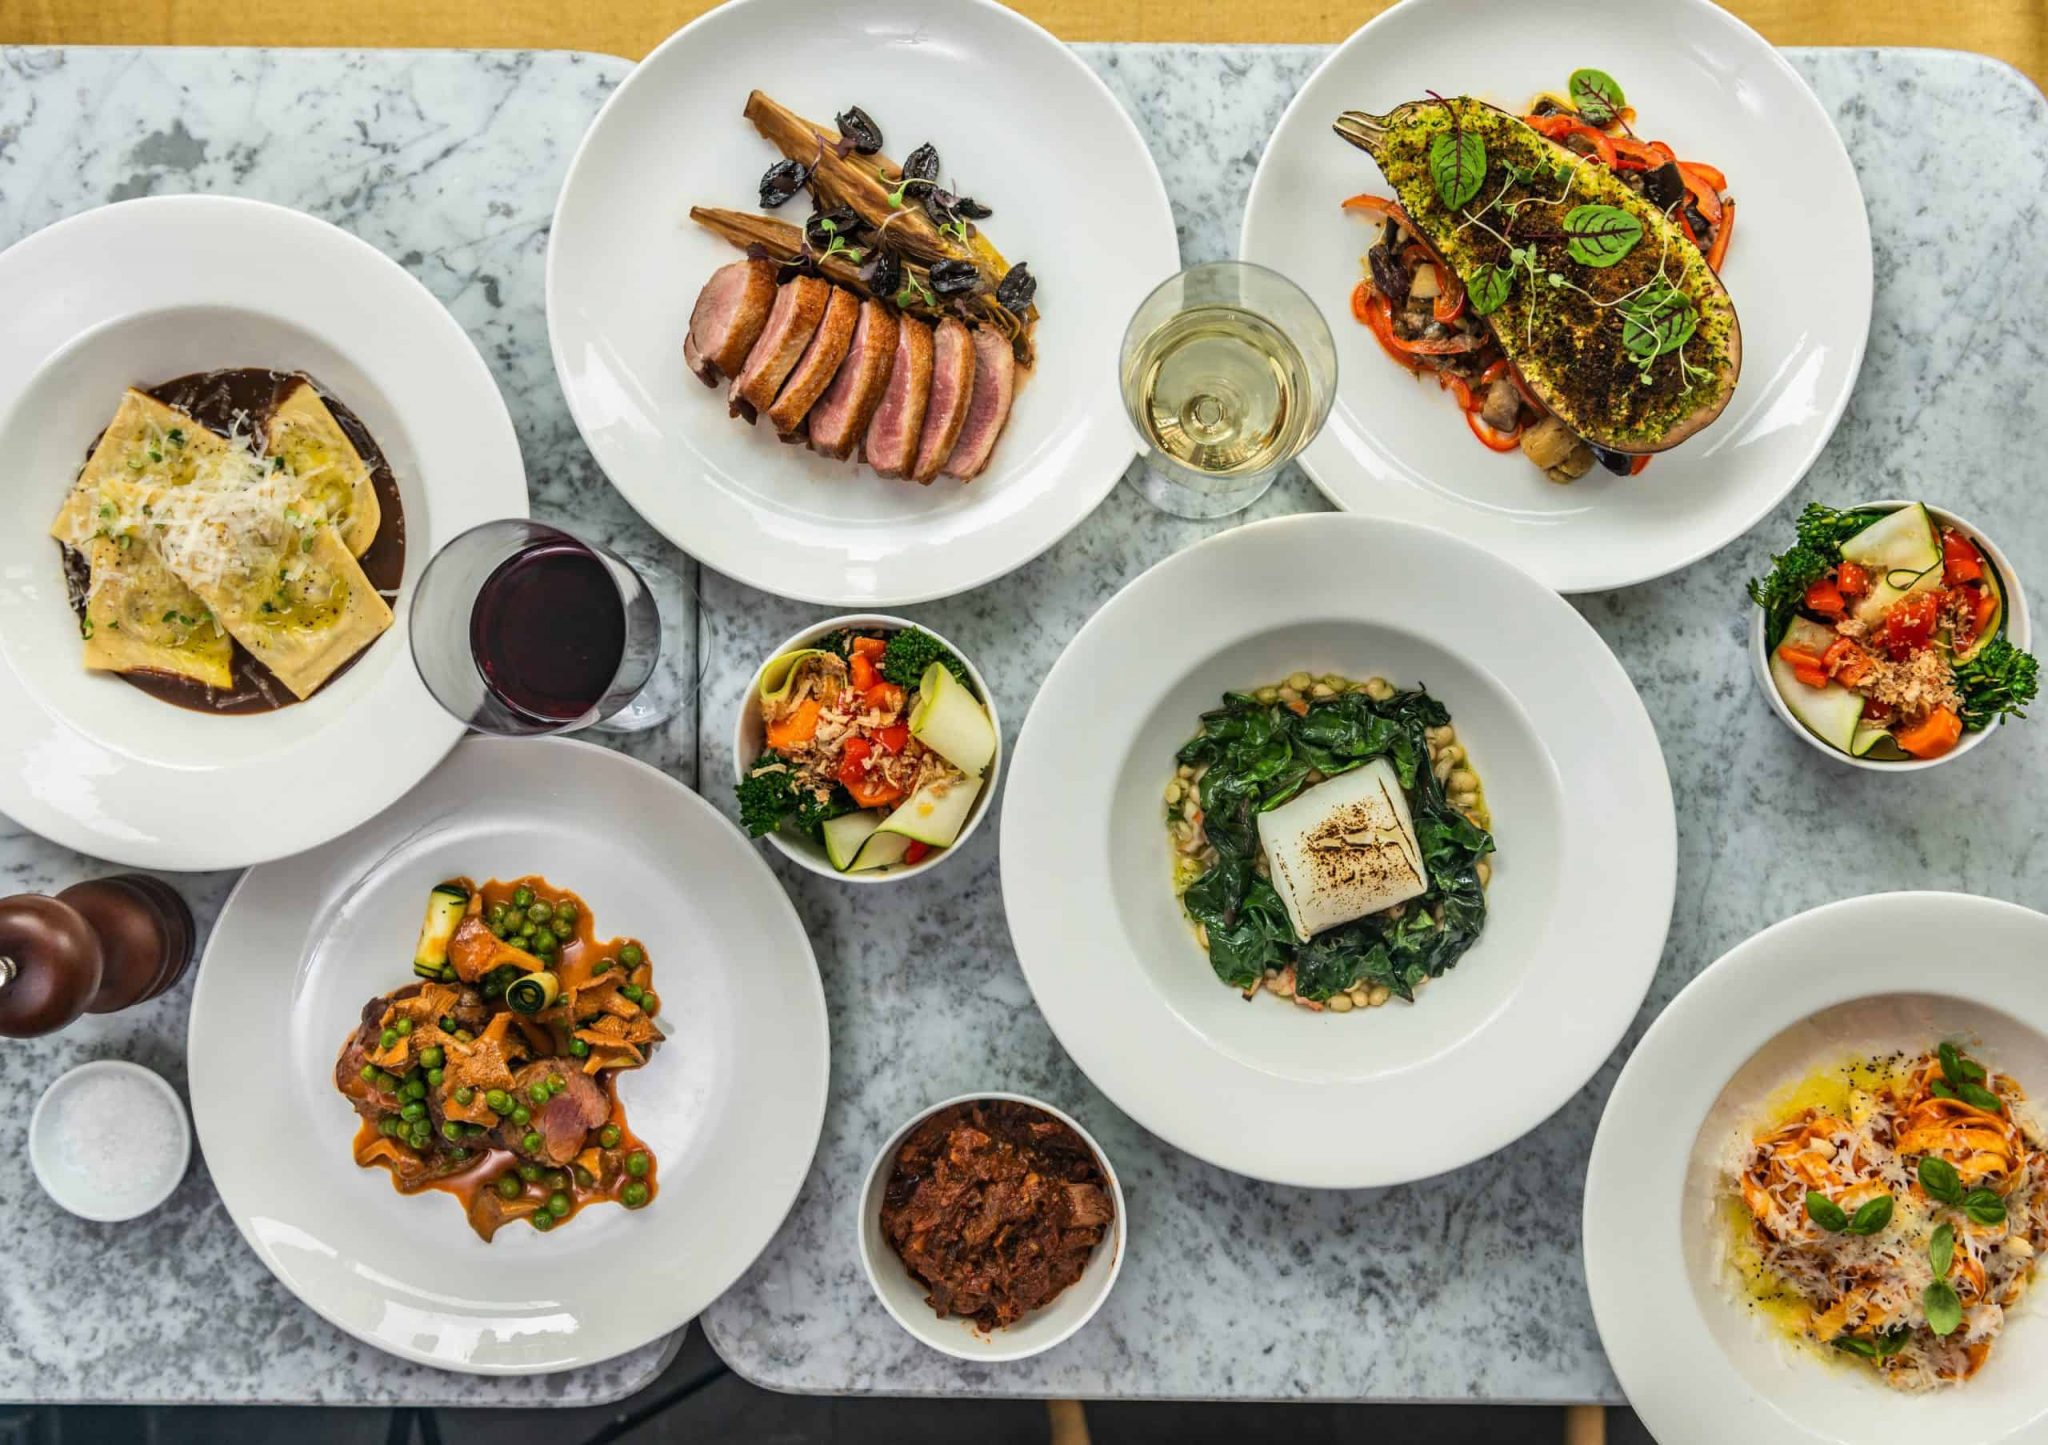 London Food and Drink Photography - LIV Restaurant Sloane Square | Photo: Nic Crilly-Hargrave